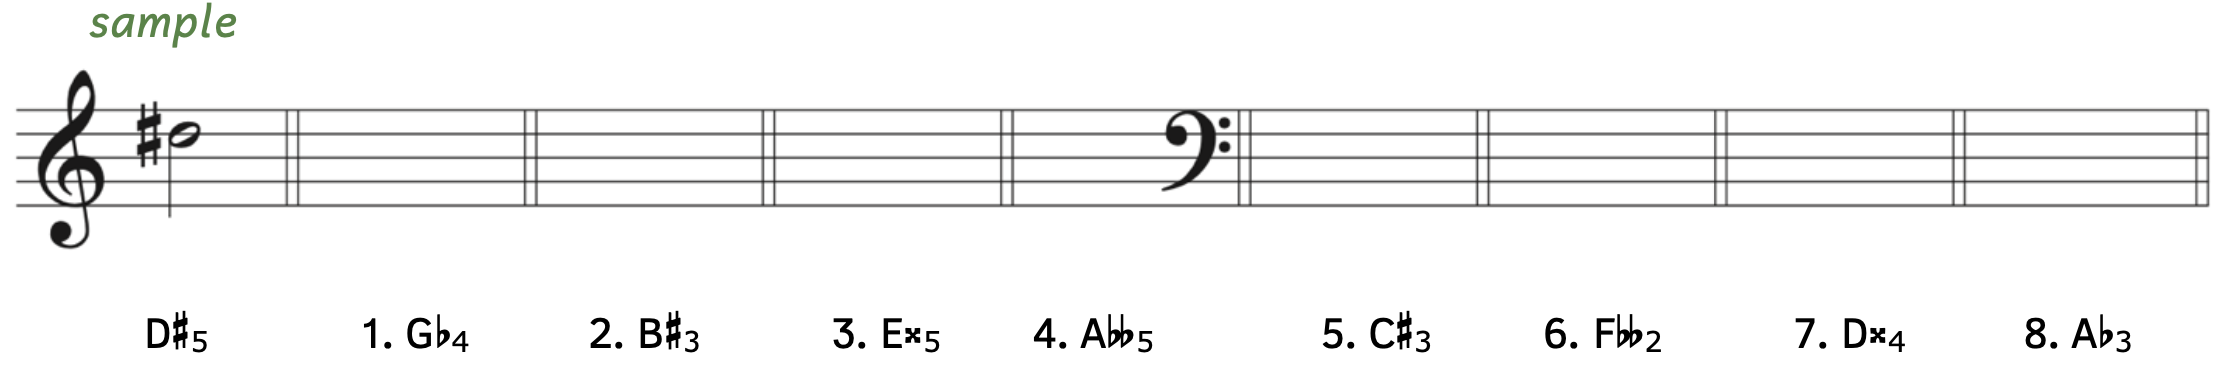 Exercise writing pitches with accidentals on a staff. Numbers 1 through 4 are in the treble clef. The sample asks for D-sharp5. Number 1 asks for G-flat4. Number 2 asks for B-sharp3. Number 3 asks for E-flat5. Number 4 asks for A-double-flat5. Numbers 5 through 8 are in the bass clef. Number 5 asks for C-sharp3. Number 6 asks for F-double-flat2. Number 7 asks for D-double-sharp4. Number 8 asks for A-flat3.